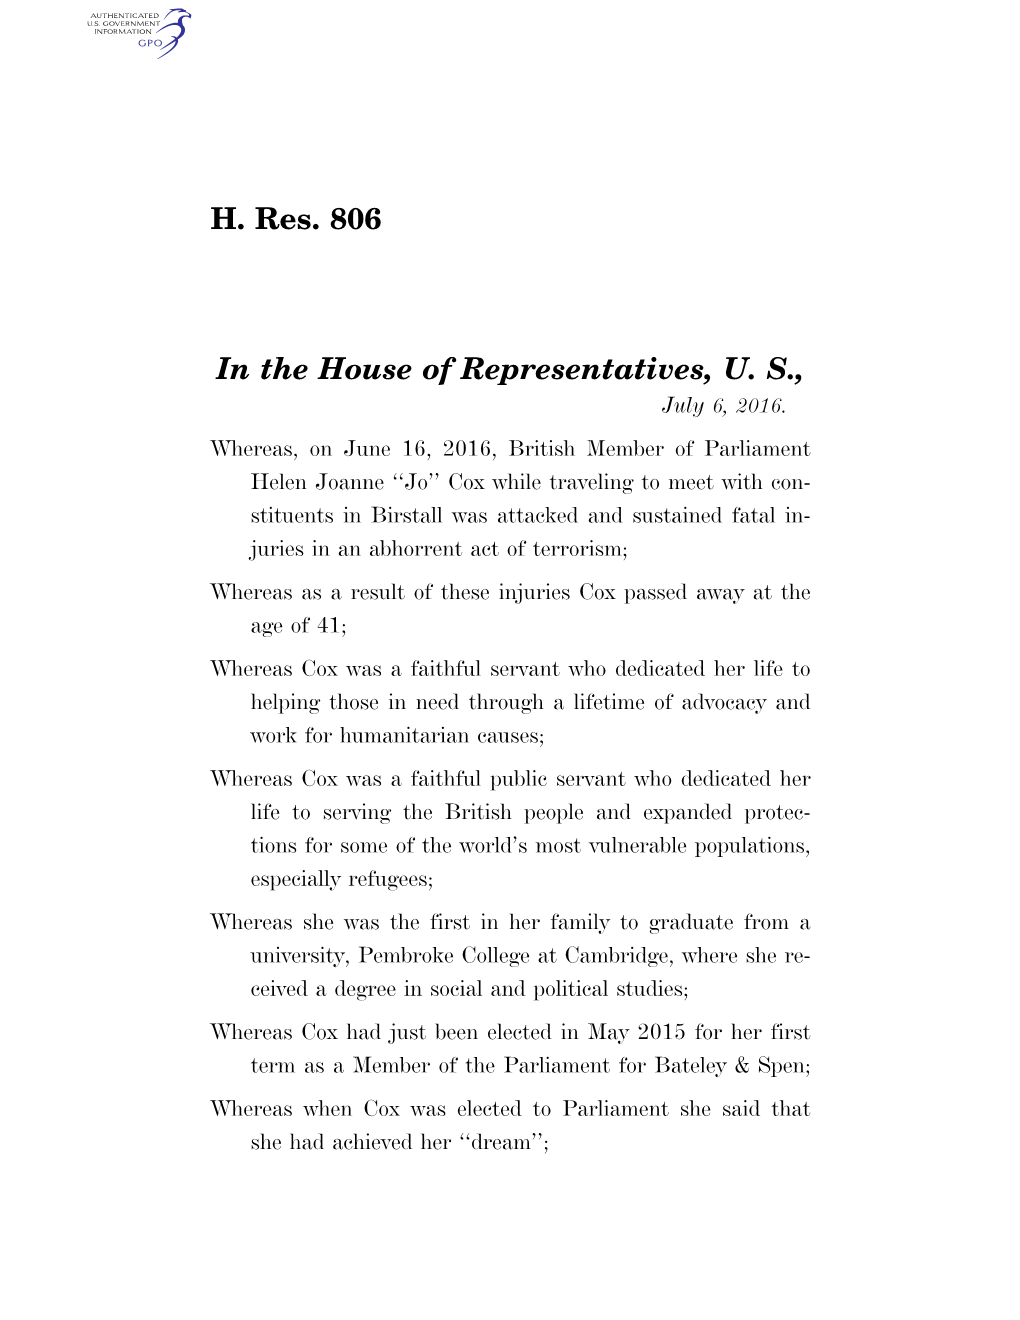 H. Res. 806 in the House of Representatives